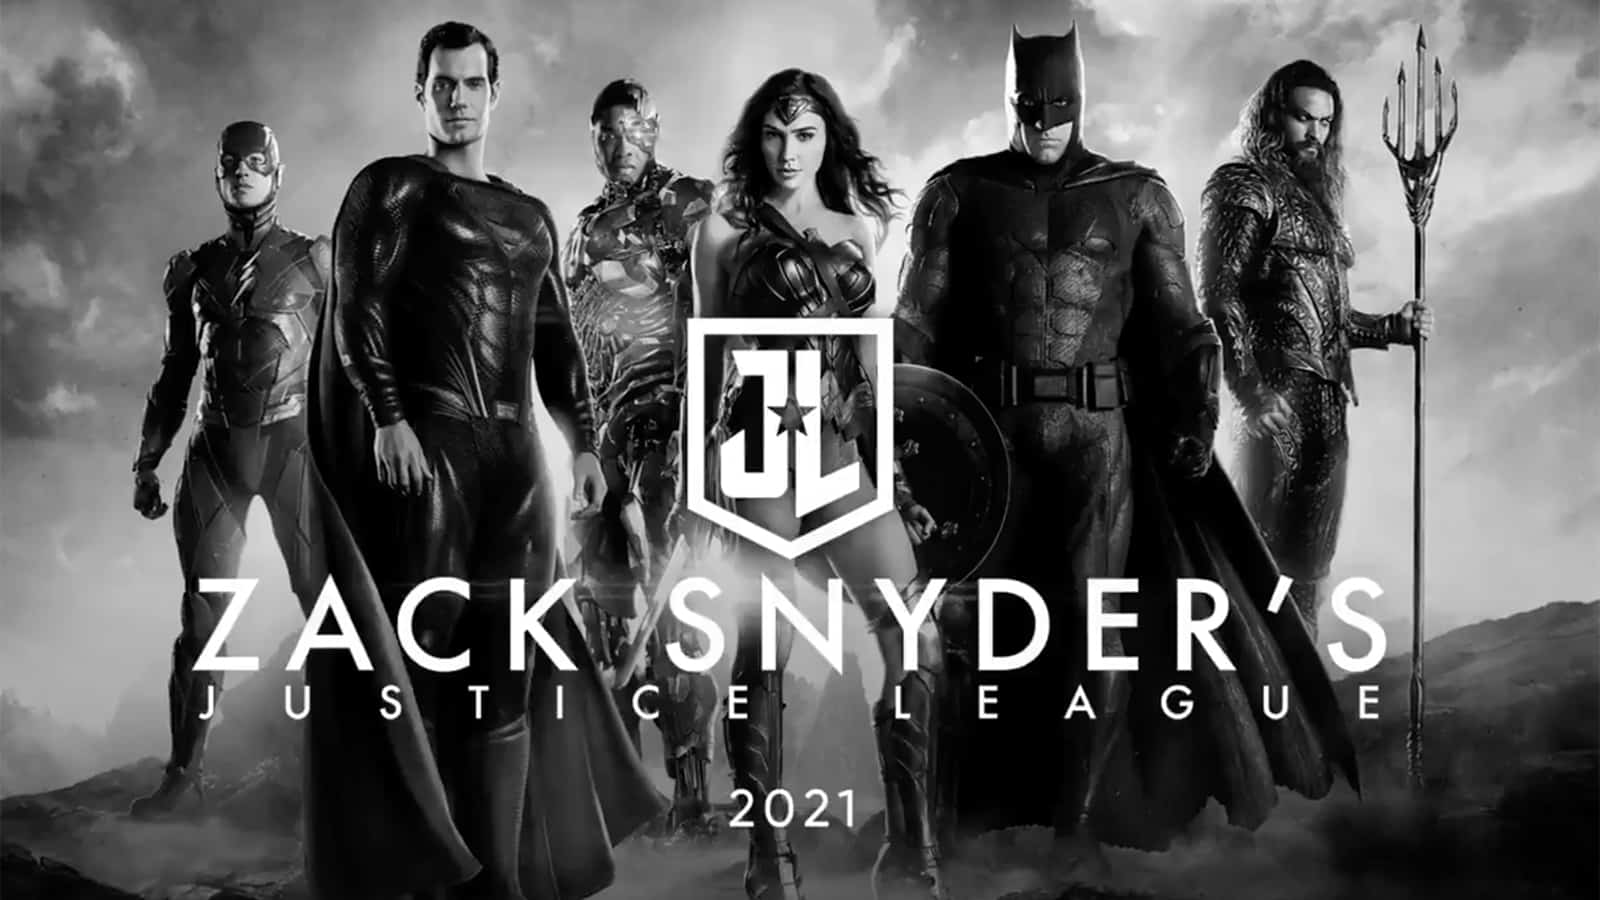 How To Watch First Look At Justice League Justice Is Gray On Twitch Date And Time Zack Snyder 